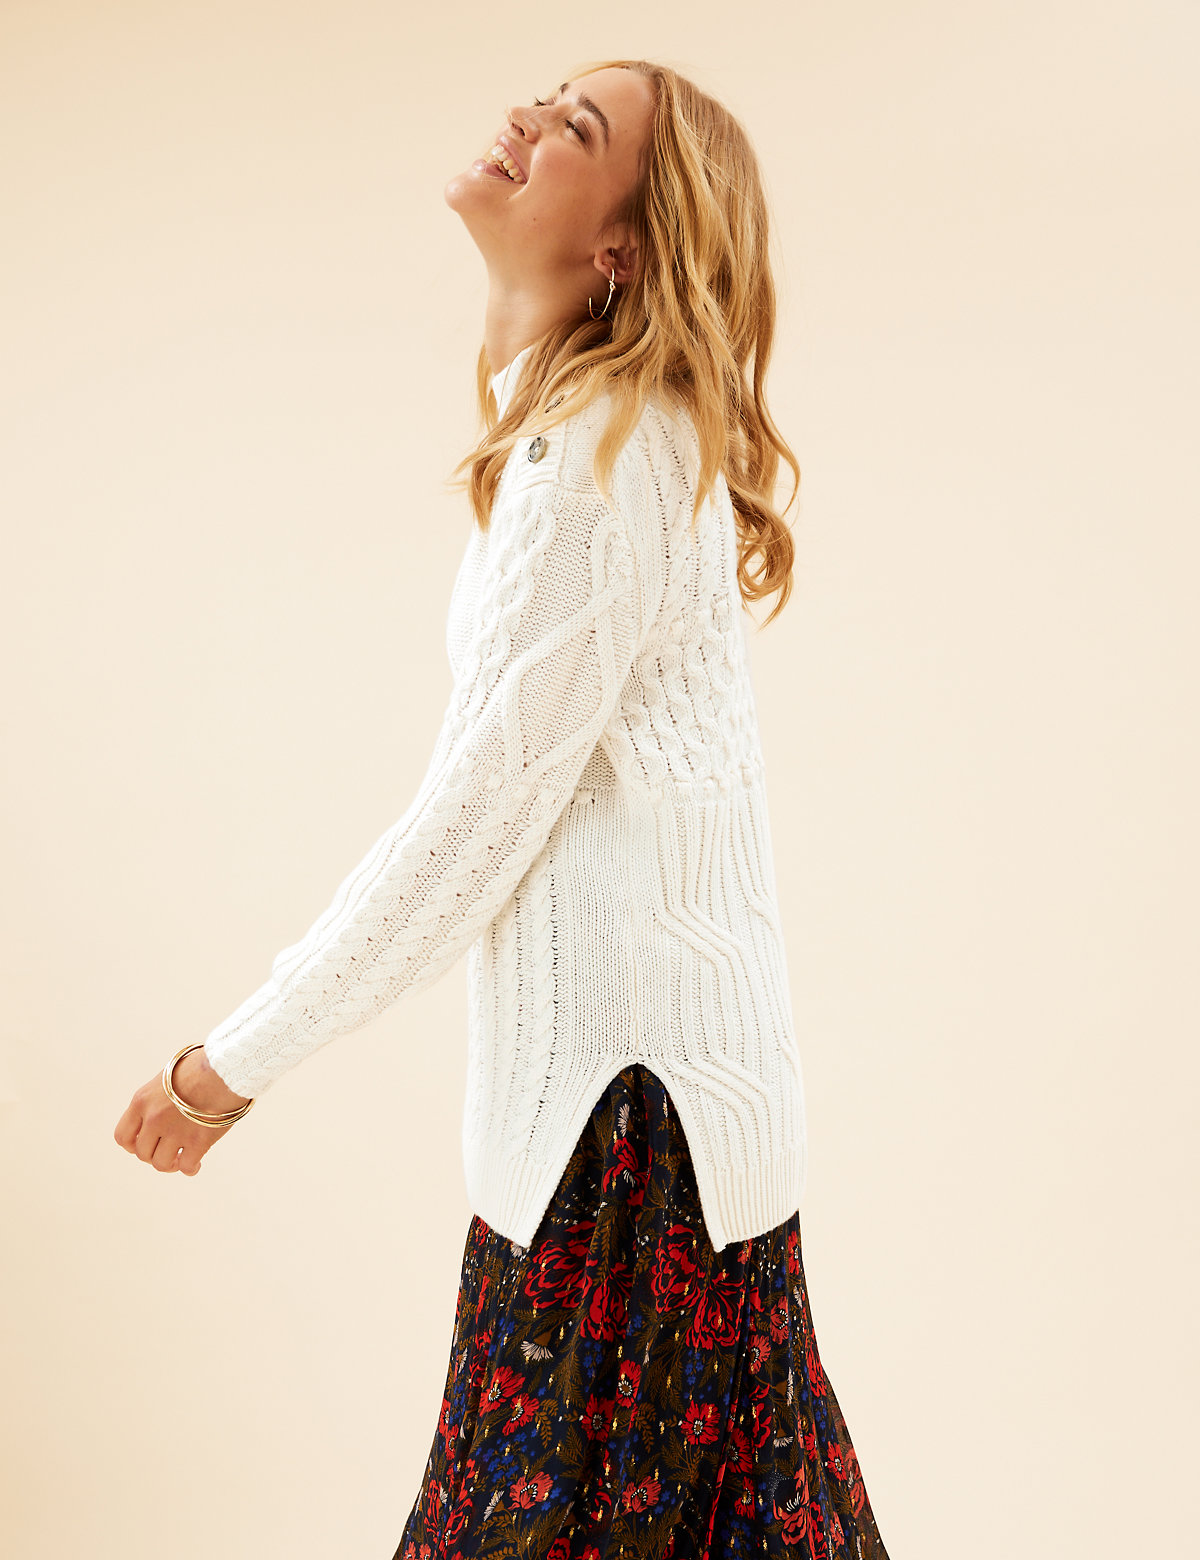 Cable Knit Longline Jumper with Wool